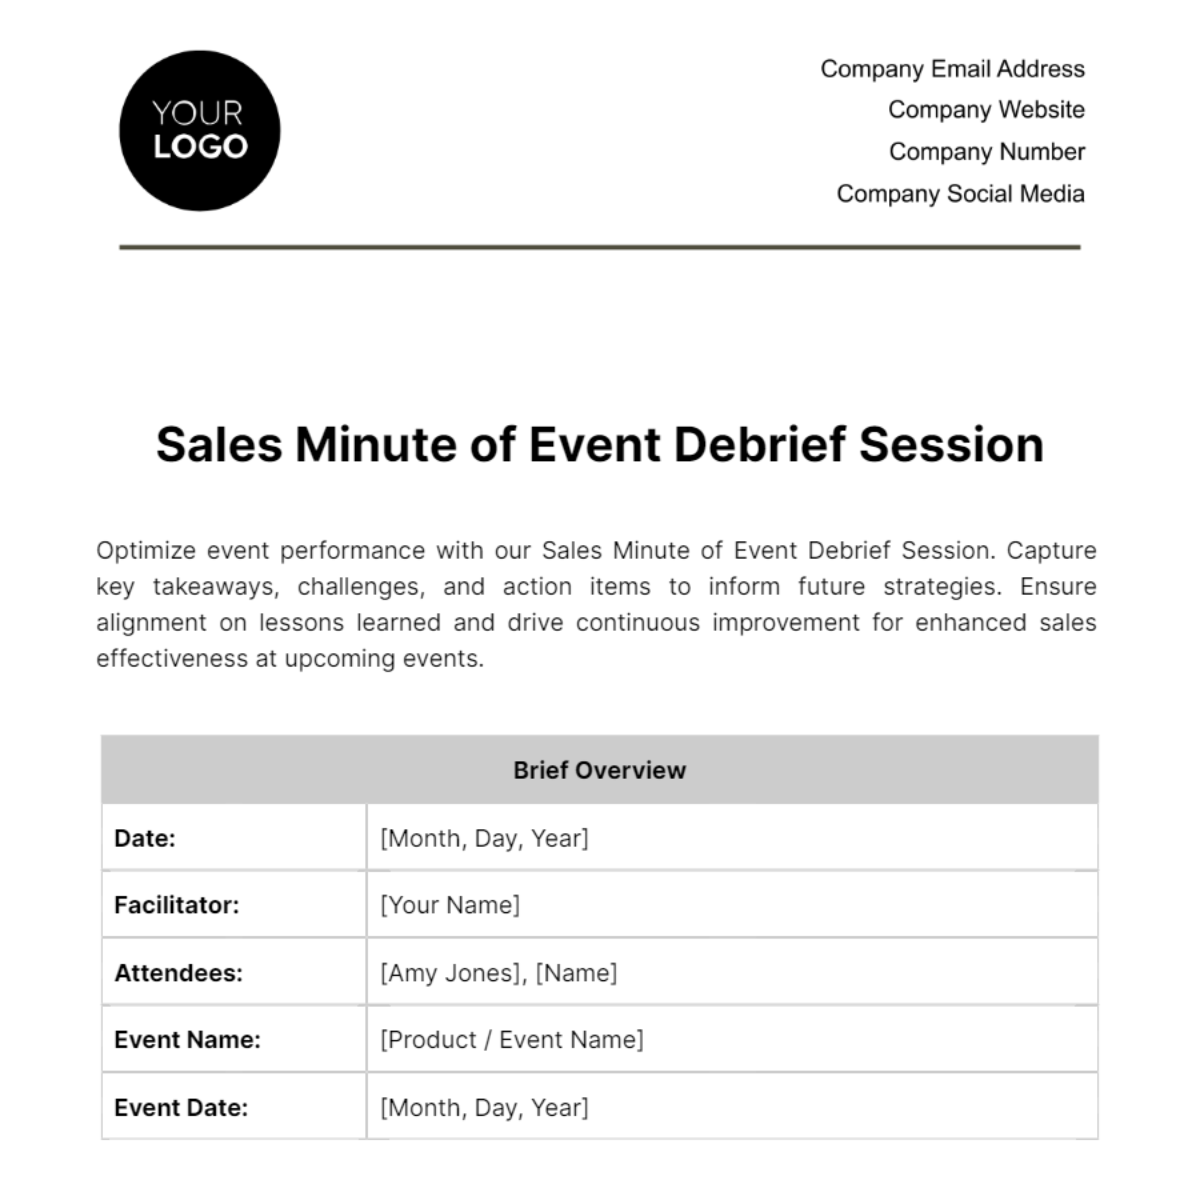 Sales Minute of Event Debrief Session Template